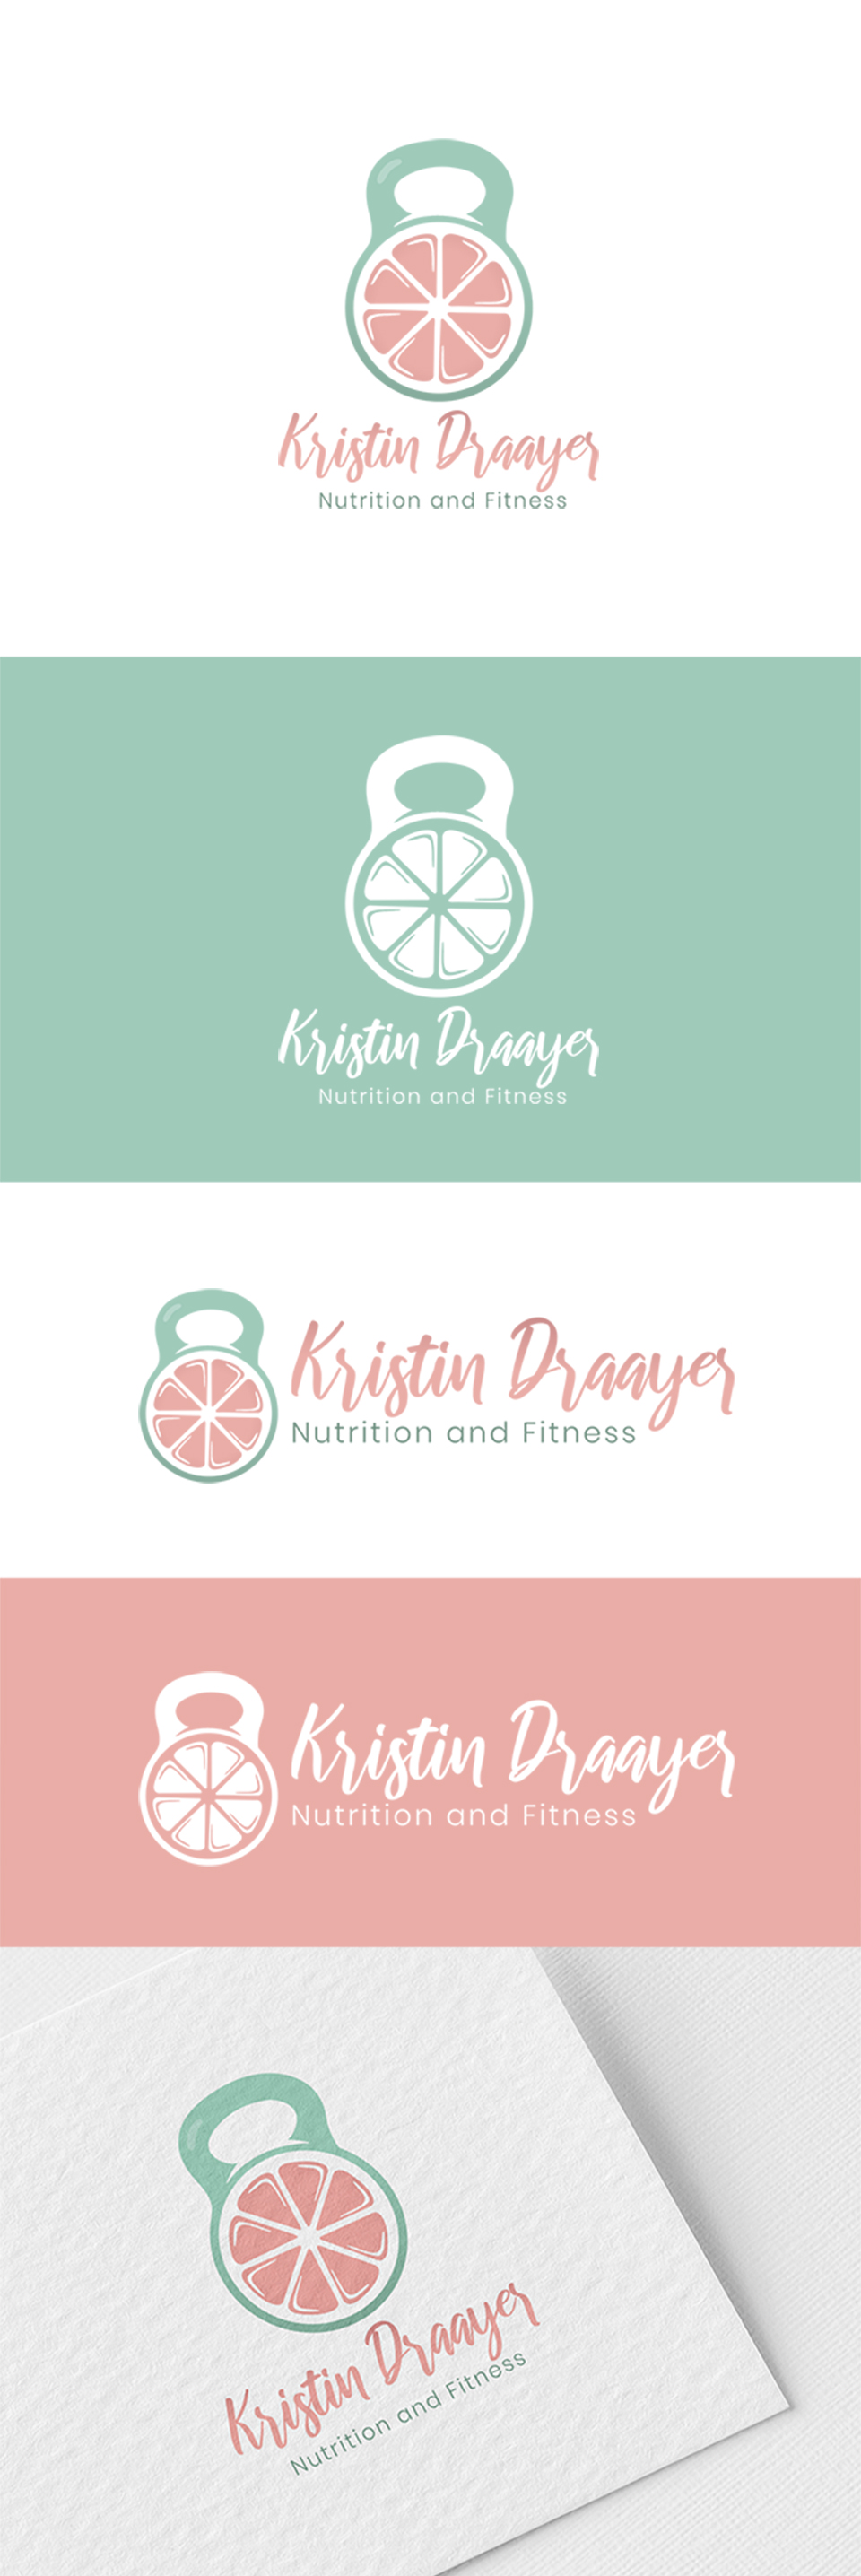 Check out kedraayer's new logo design from 99designs - Check out kedraayer's new logo design from 99designs -   10 healthy fitness Logo ideas